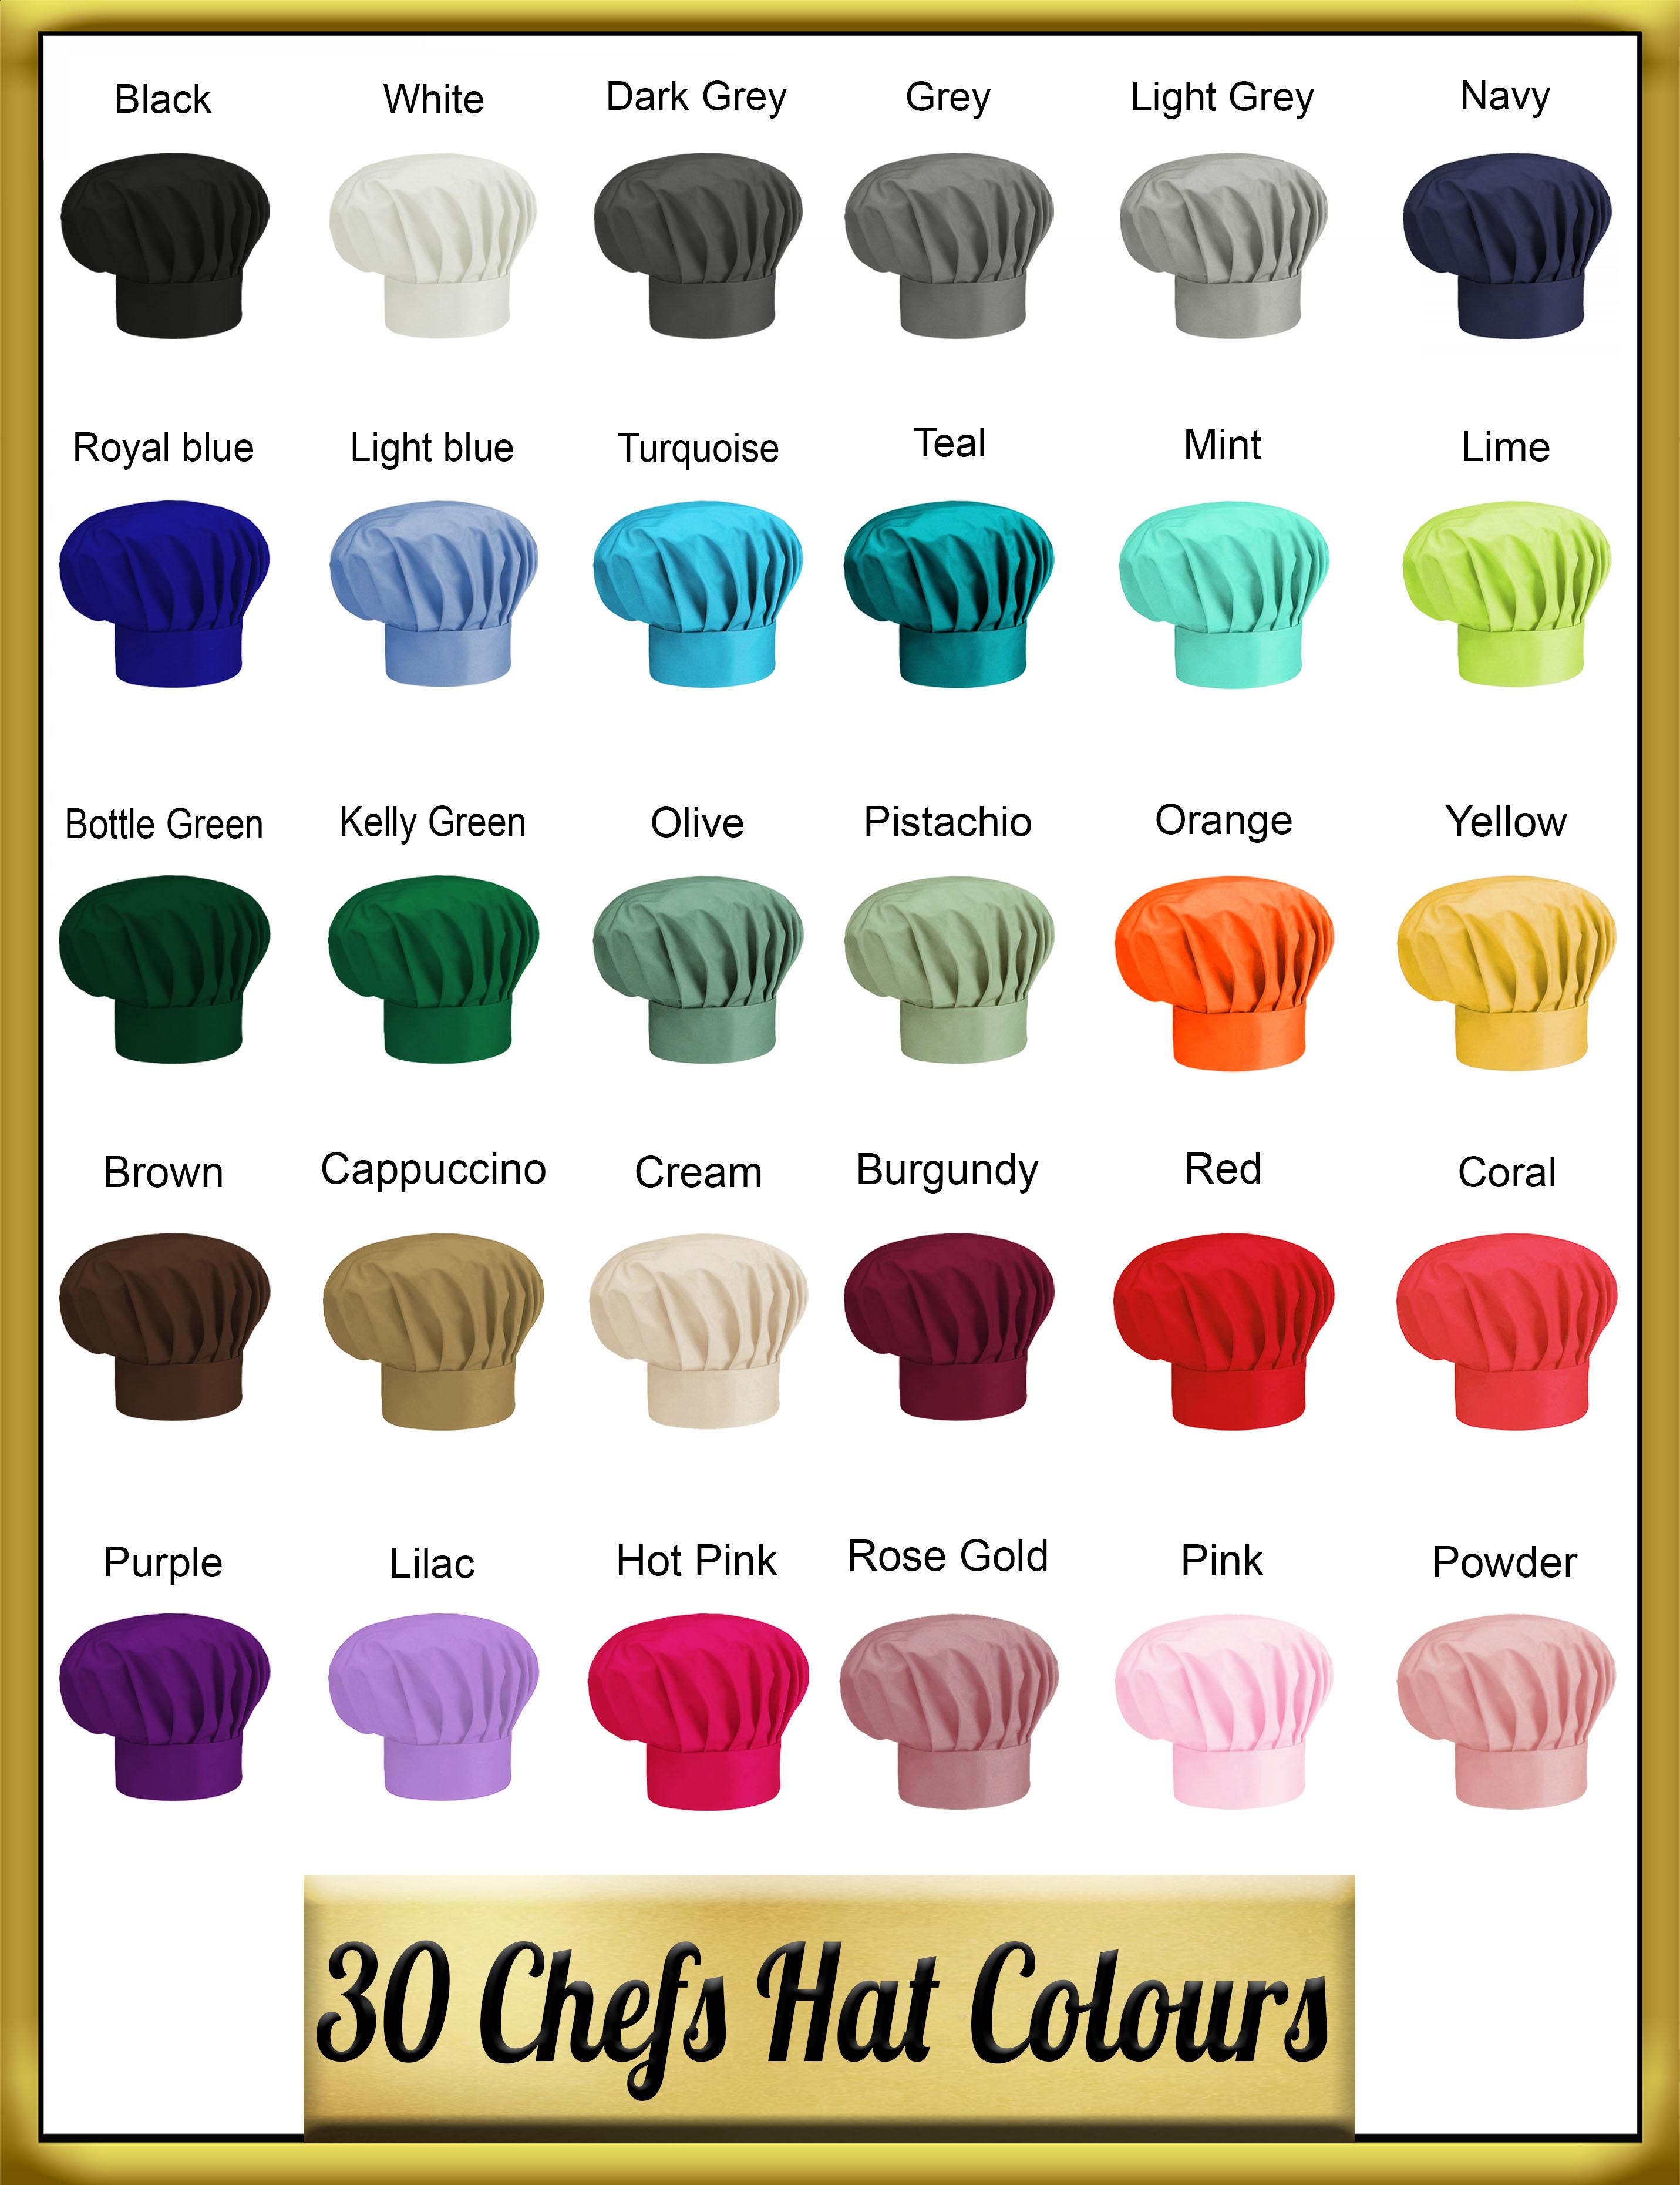 Food King chef hat colours